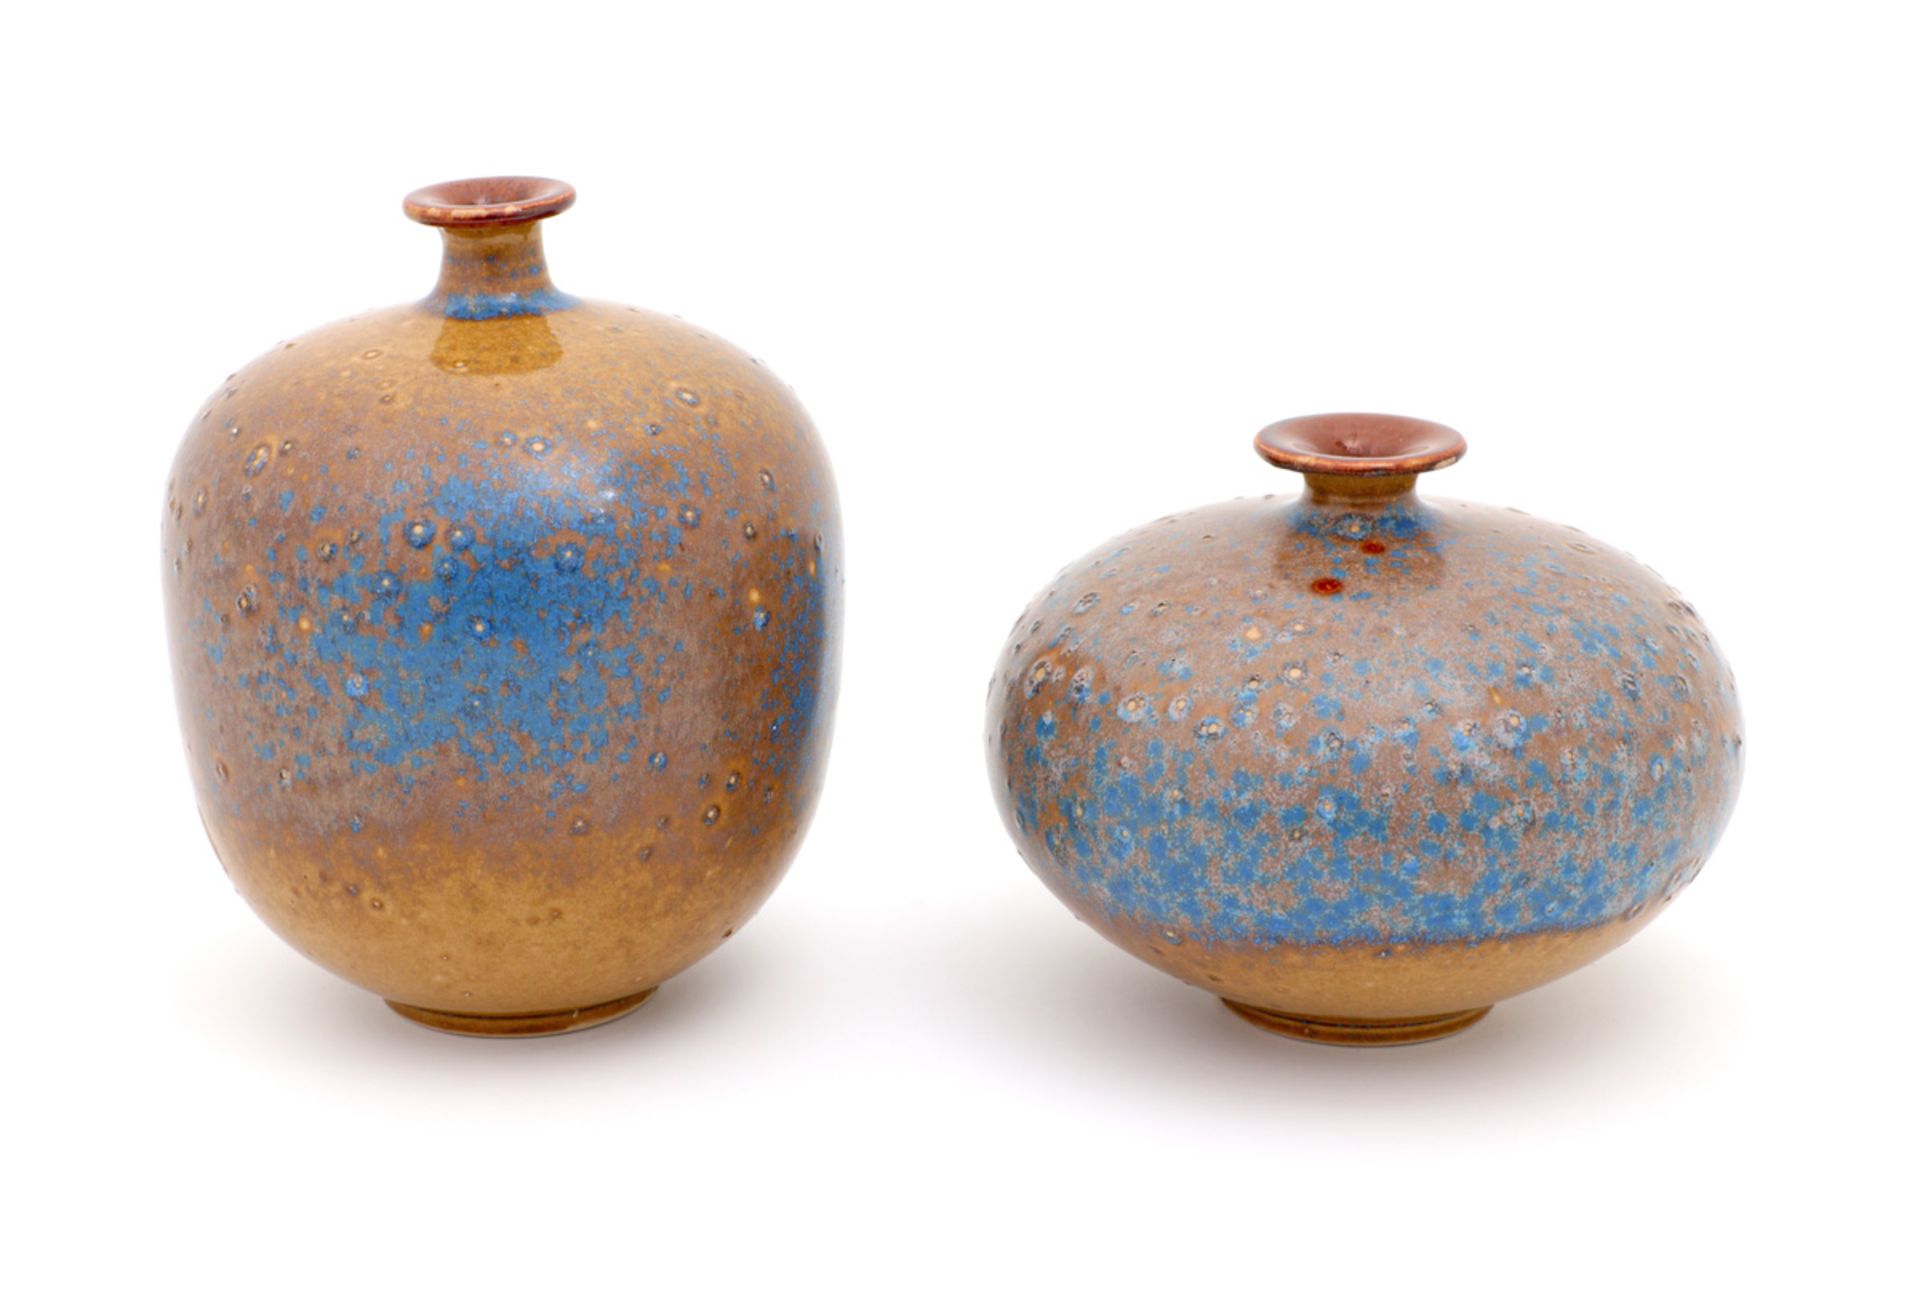 A PAIR OF VASES French ceramic, 1950s, decoration in yellow, blue and brown shades. Marked.